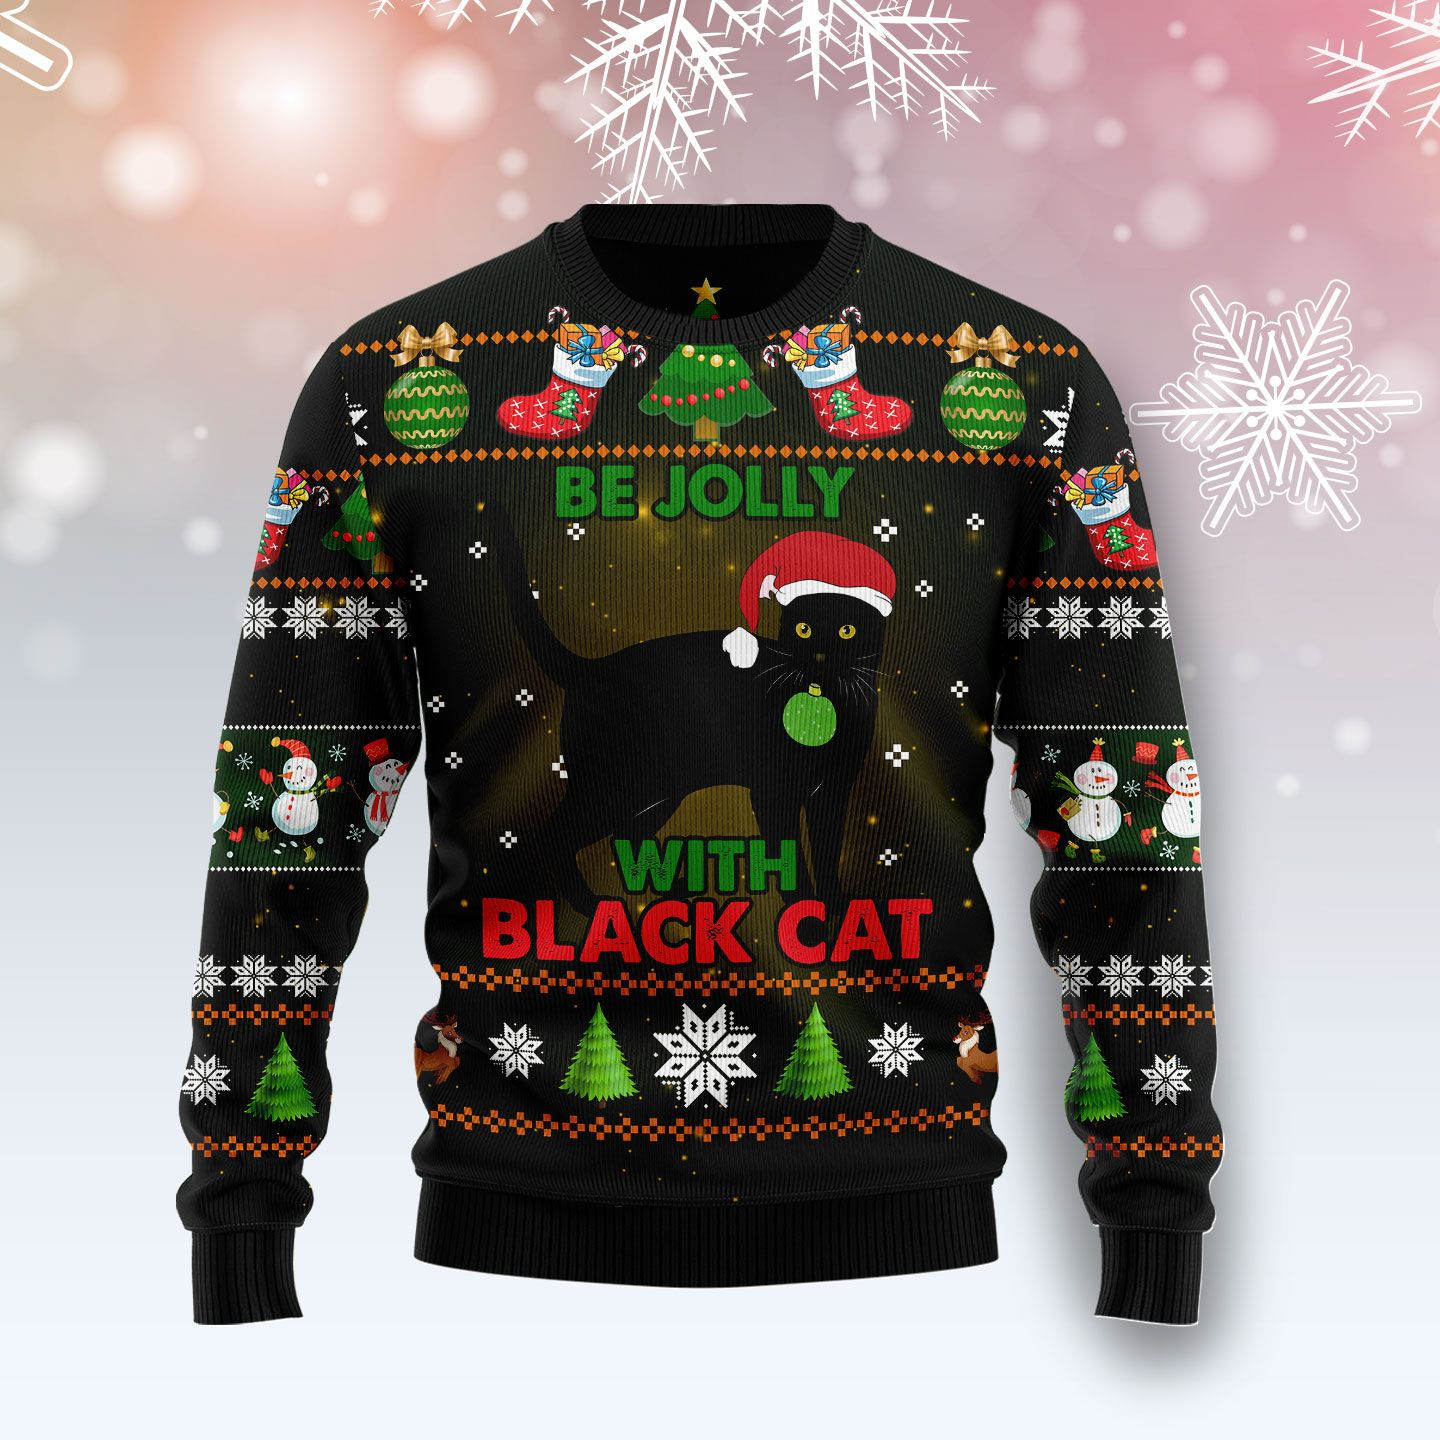 Black Cat Be Jolly Ugly Christmas Sweater Ugly Sweater For Men Women